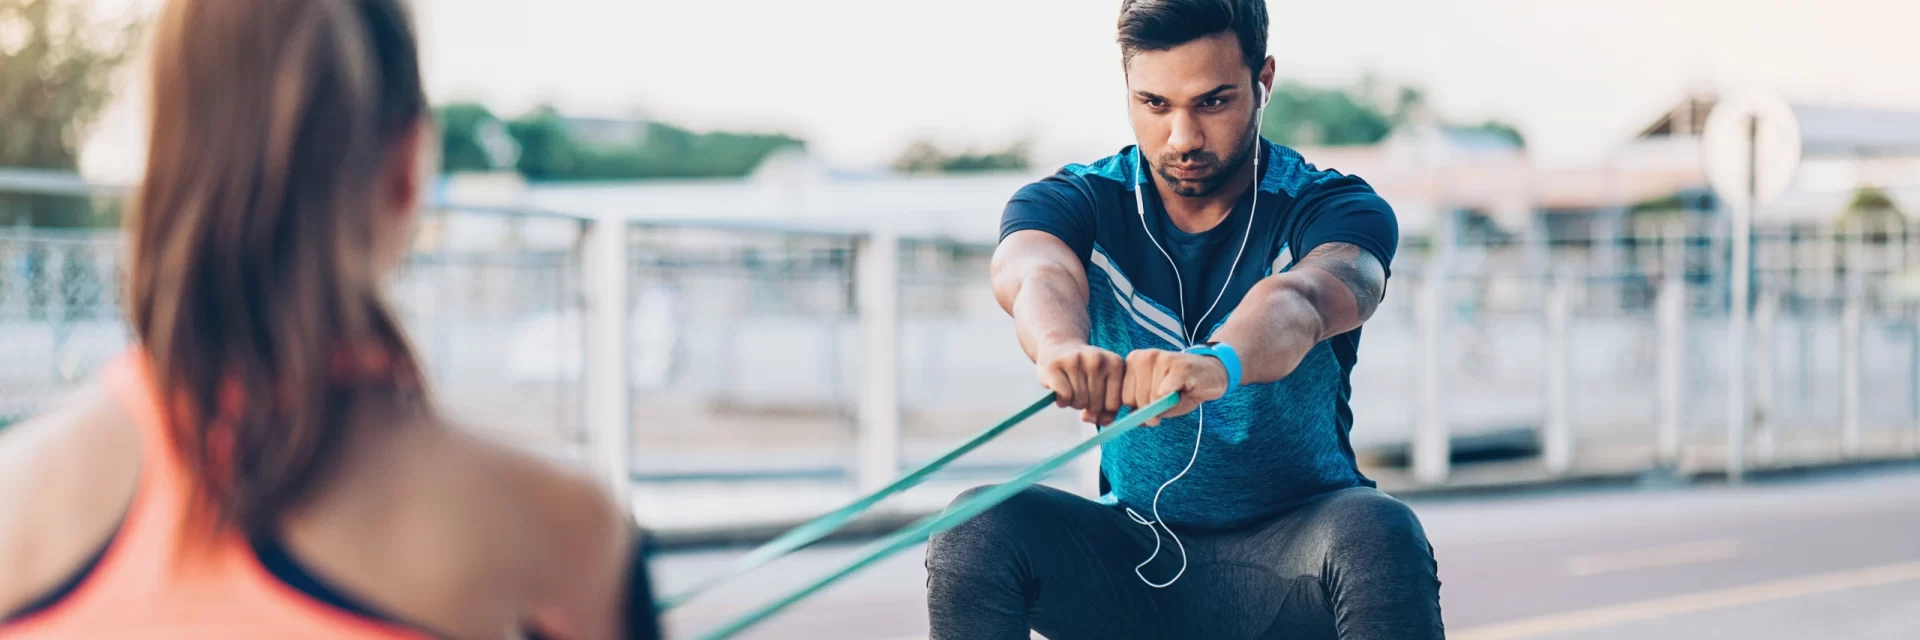 Resistance band workout routine when traveling